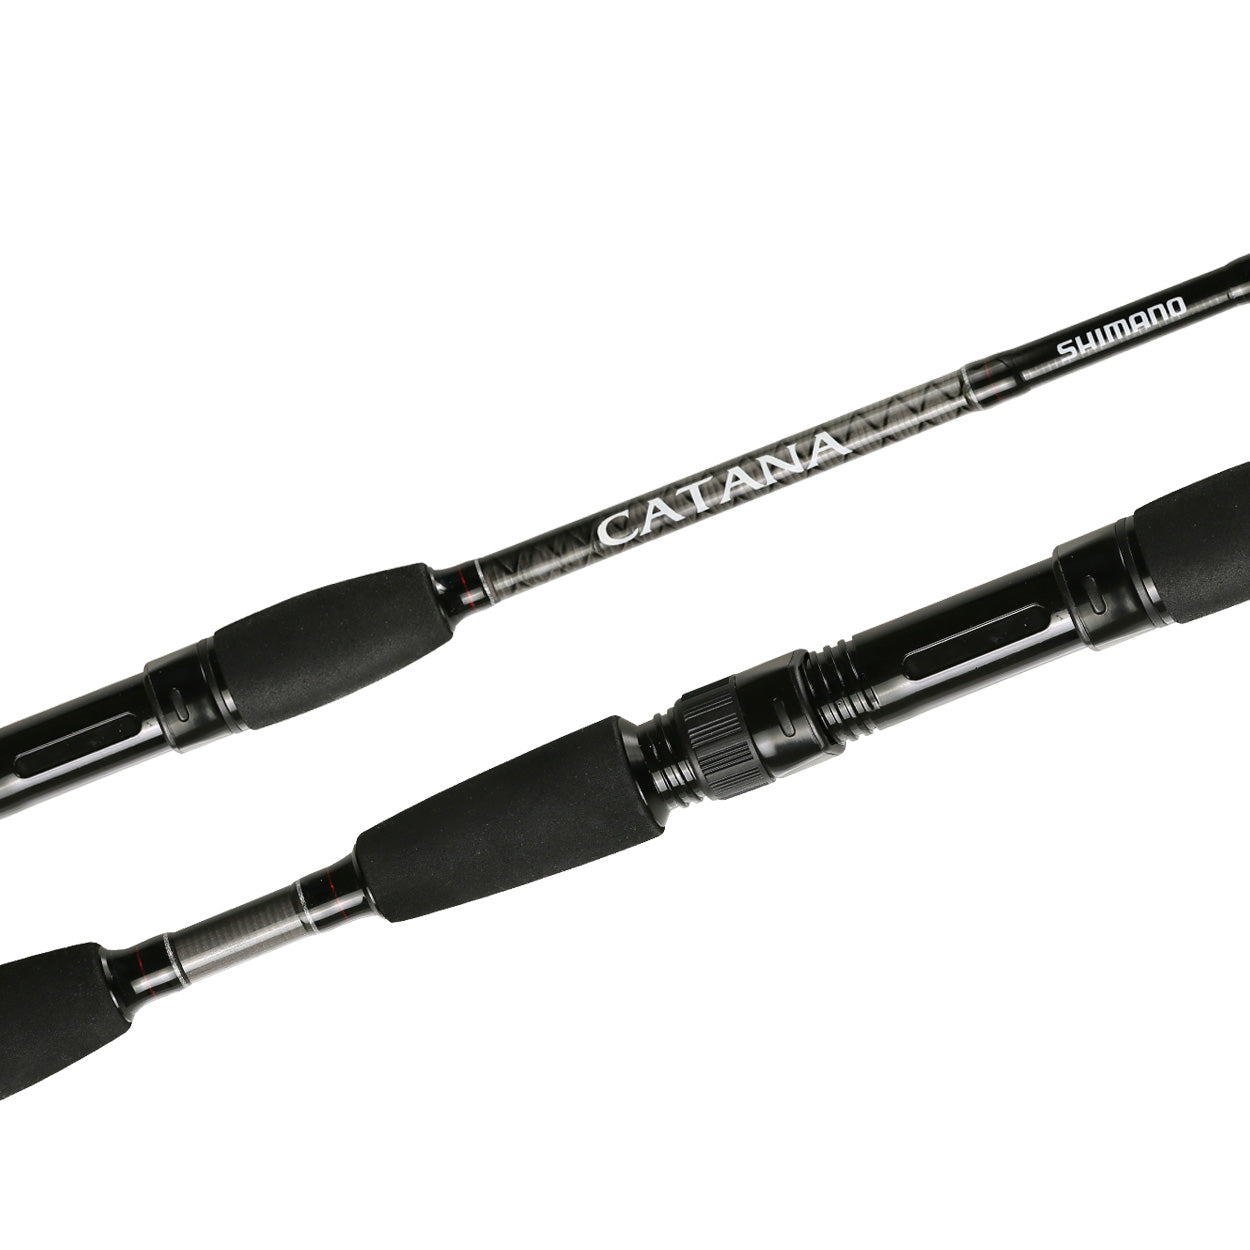 Shimano Eclipse Telescopic Travel Rod with Bag